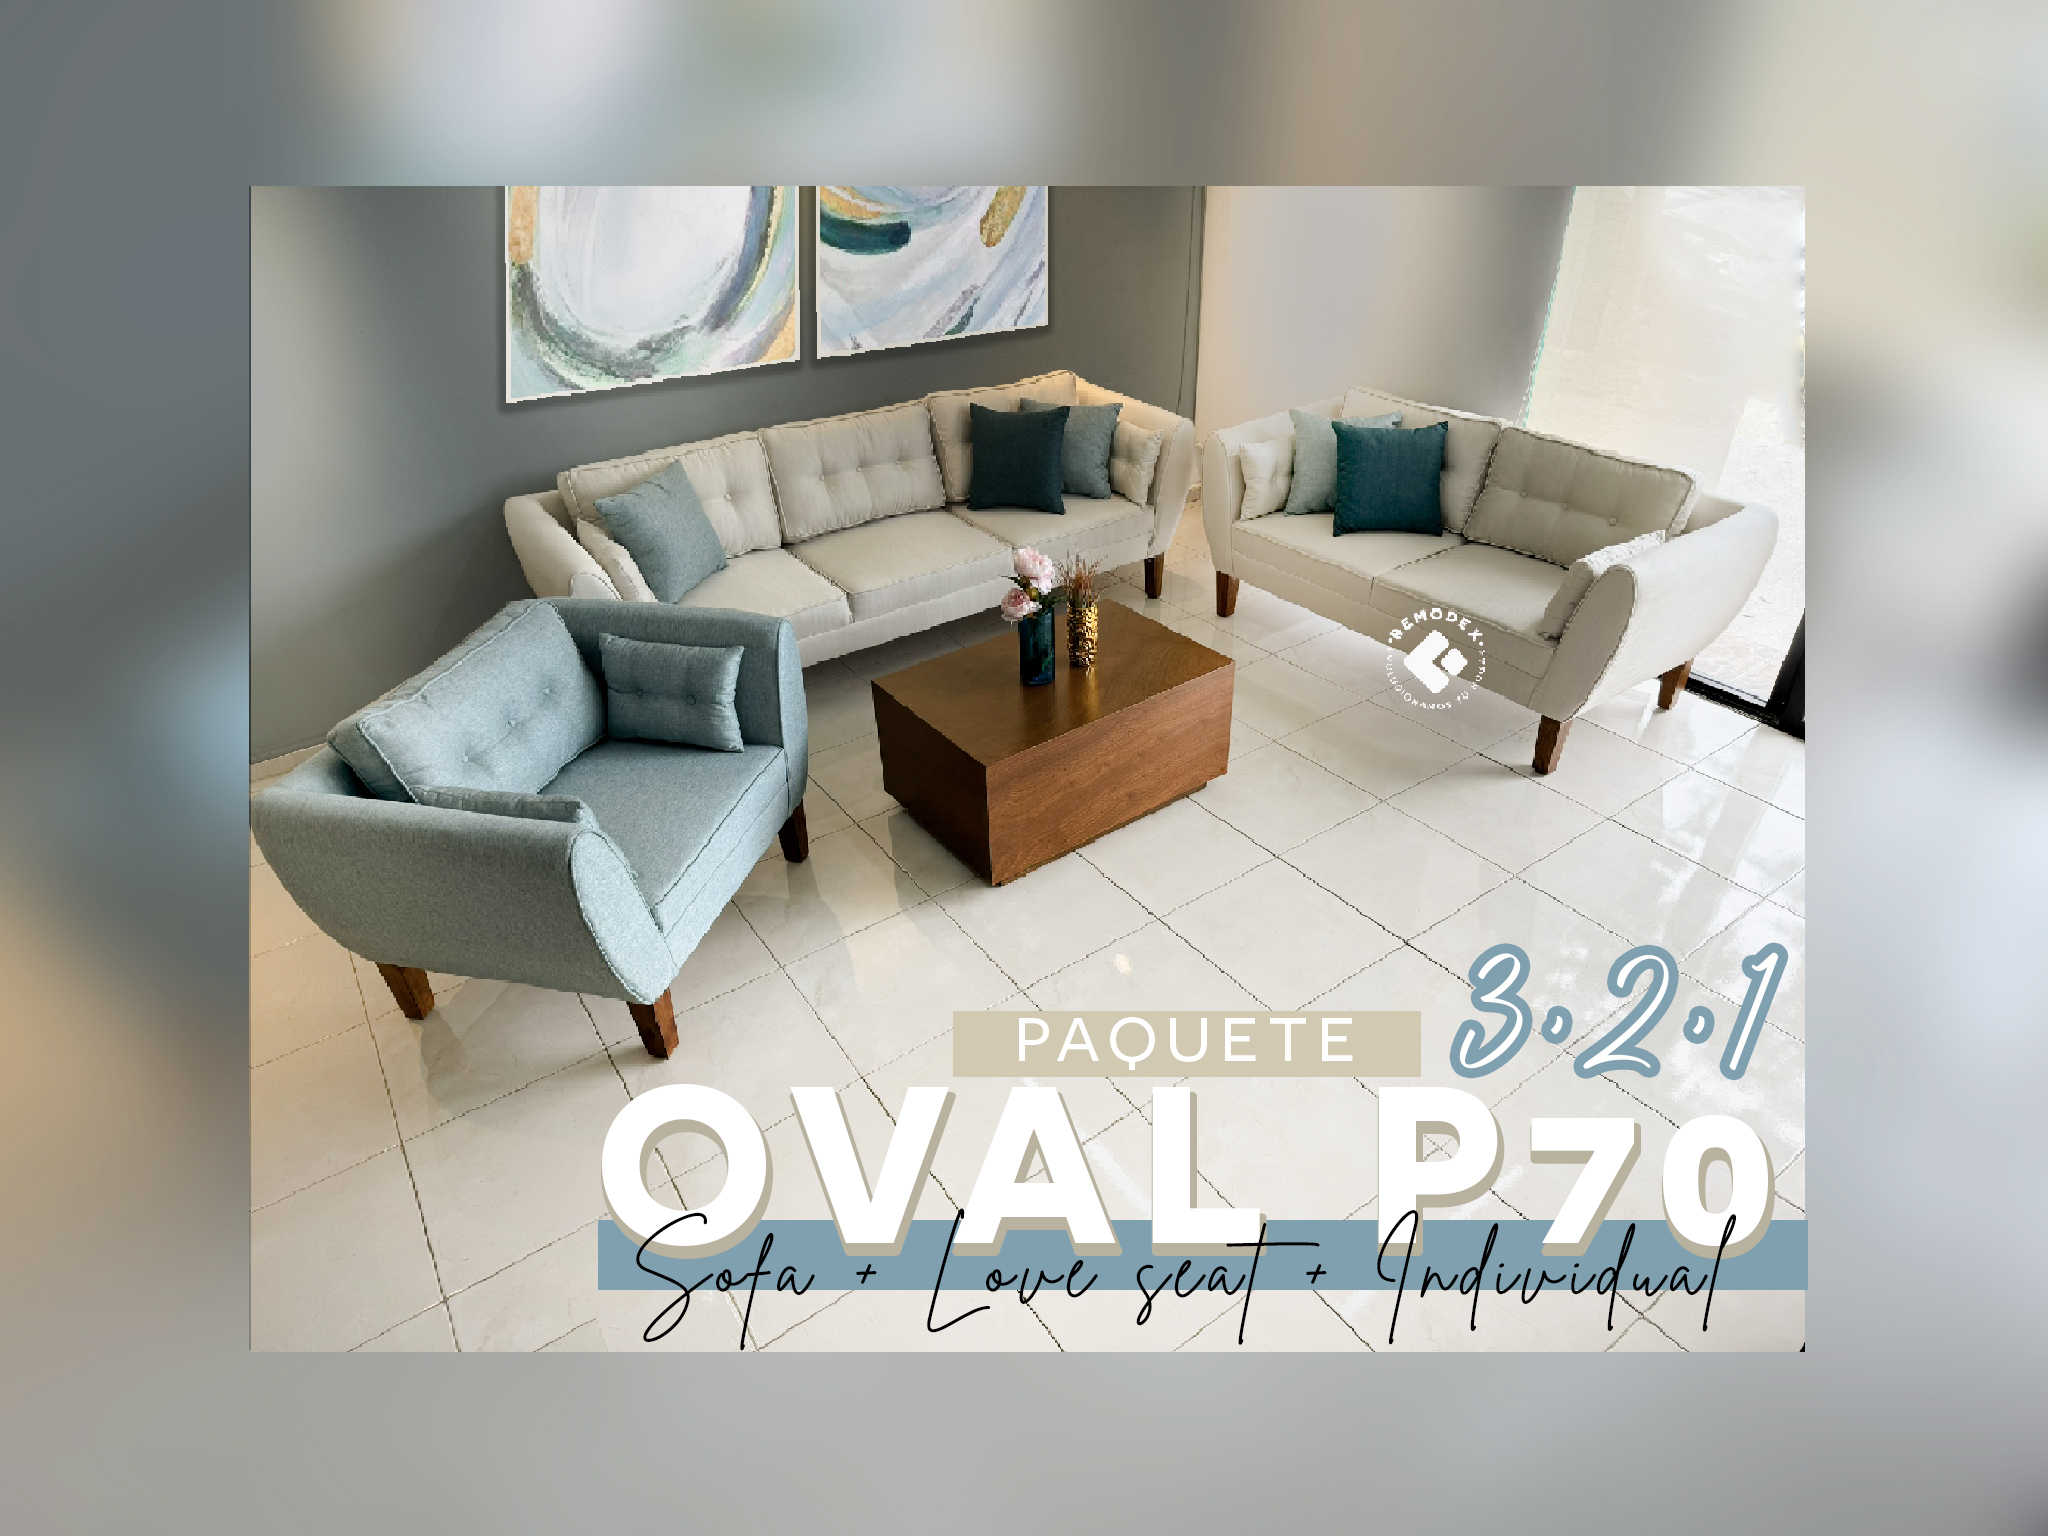 PAQUETE 3,2,1 OVAL P70